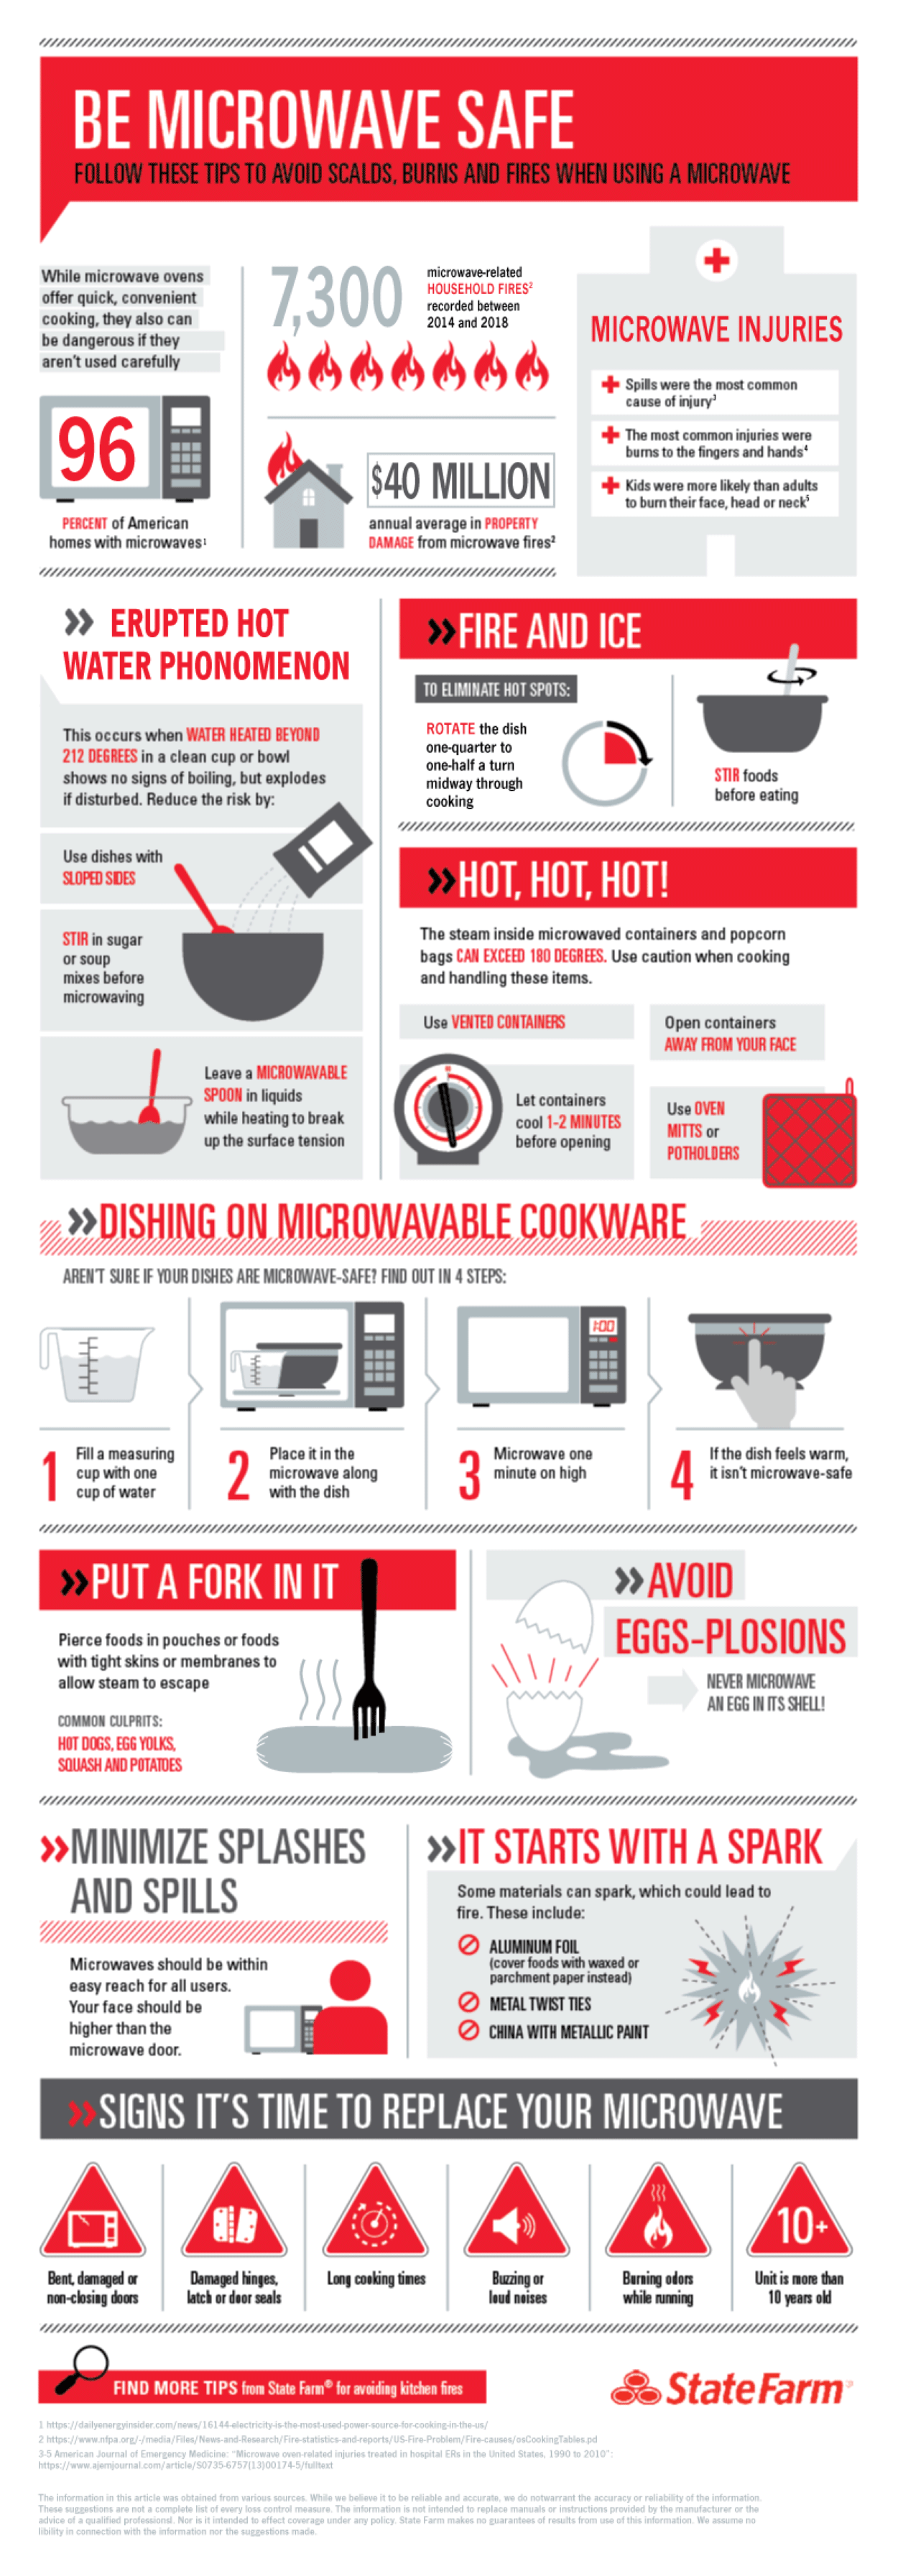 microwave-safety-beware-of-potential-dangers